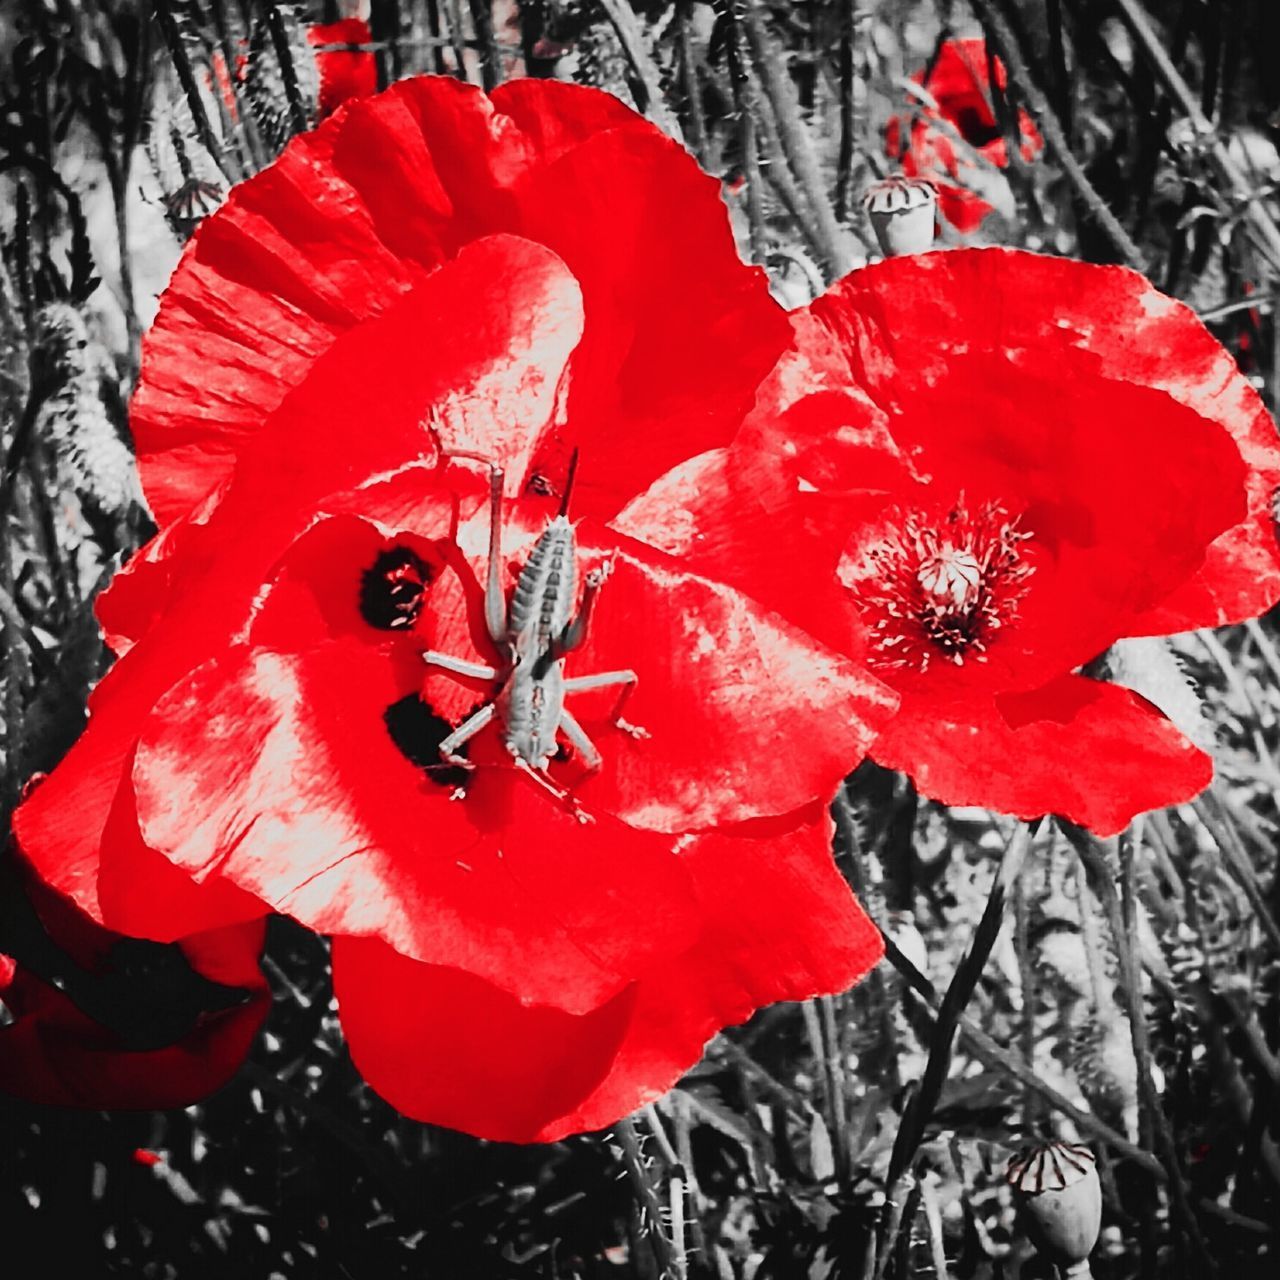 CLOSE-UP OF RED POPPY FLOWER IN BLOOM